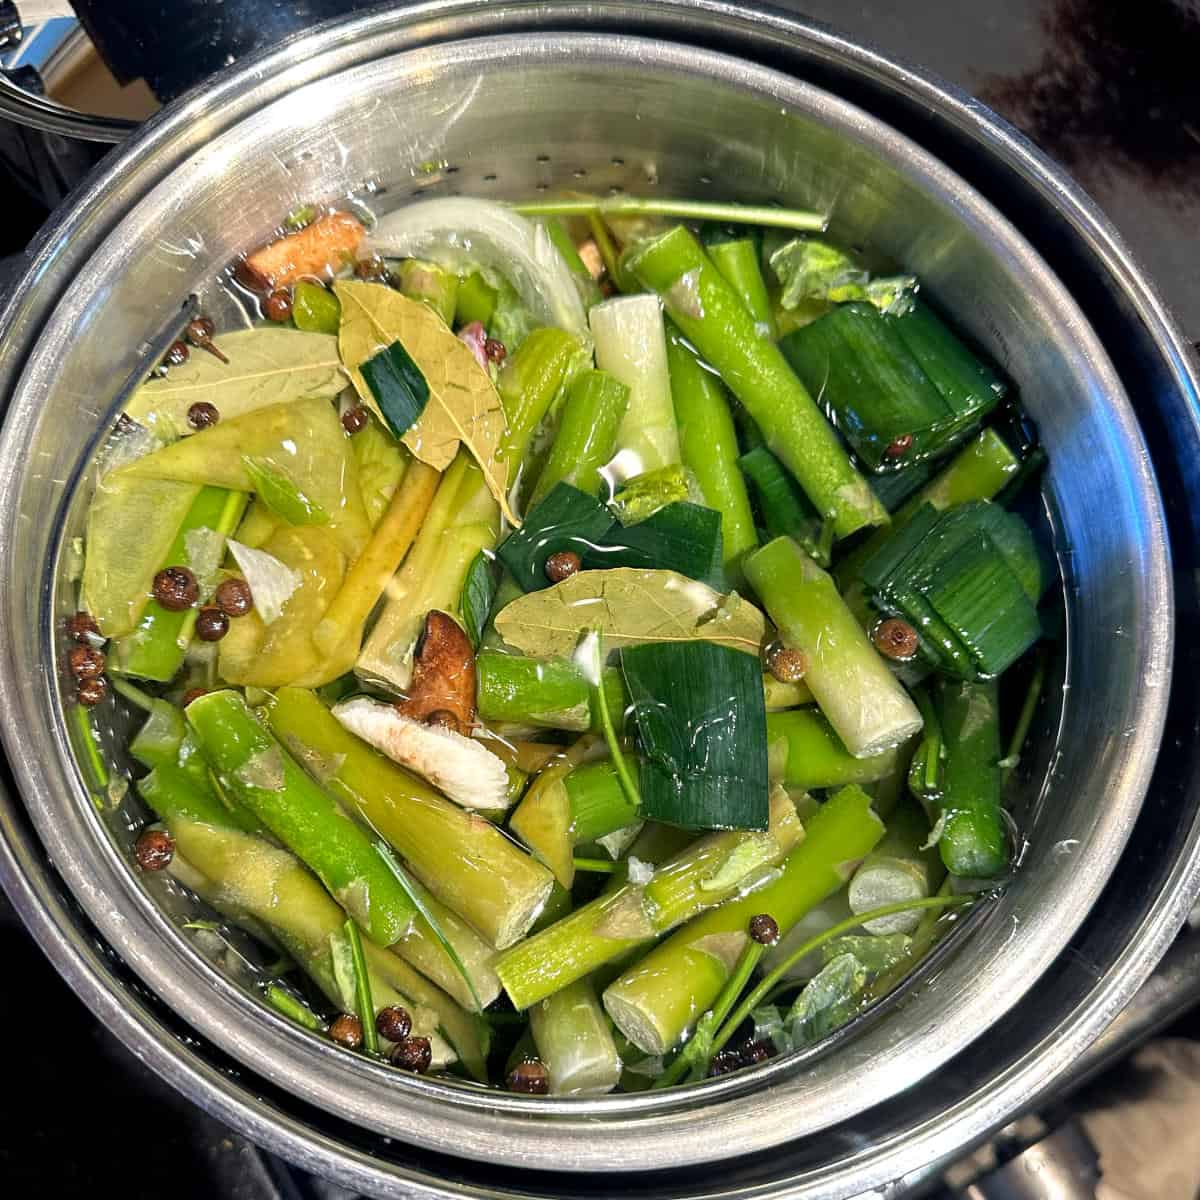 Water added to vegetables and herbs and spices in stockpot.